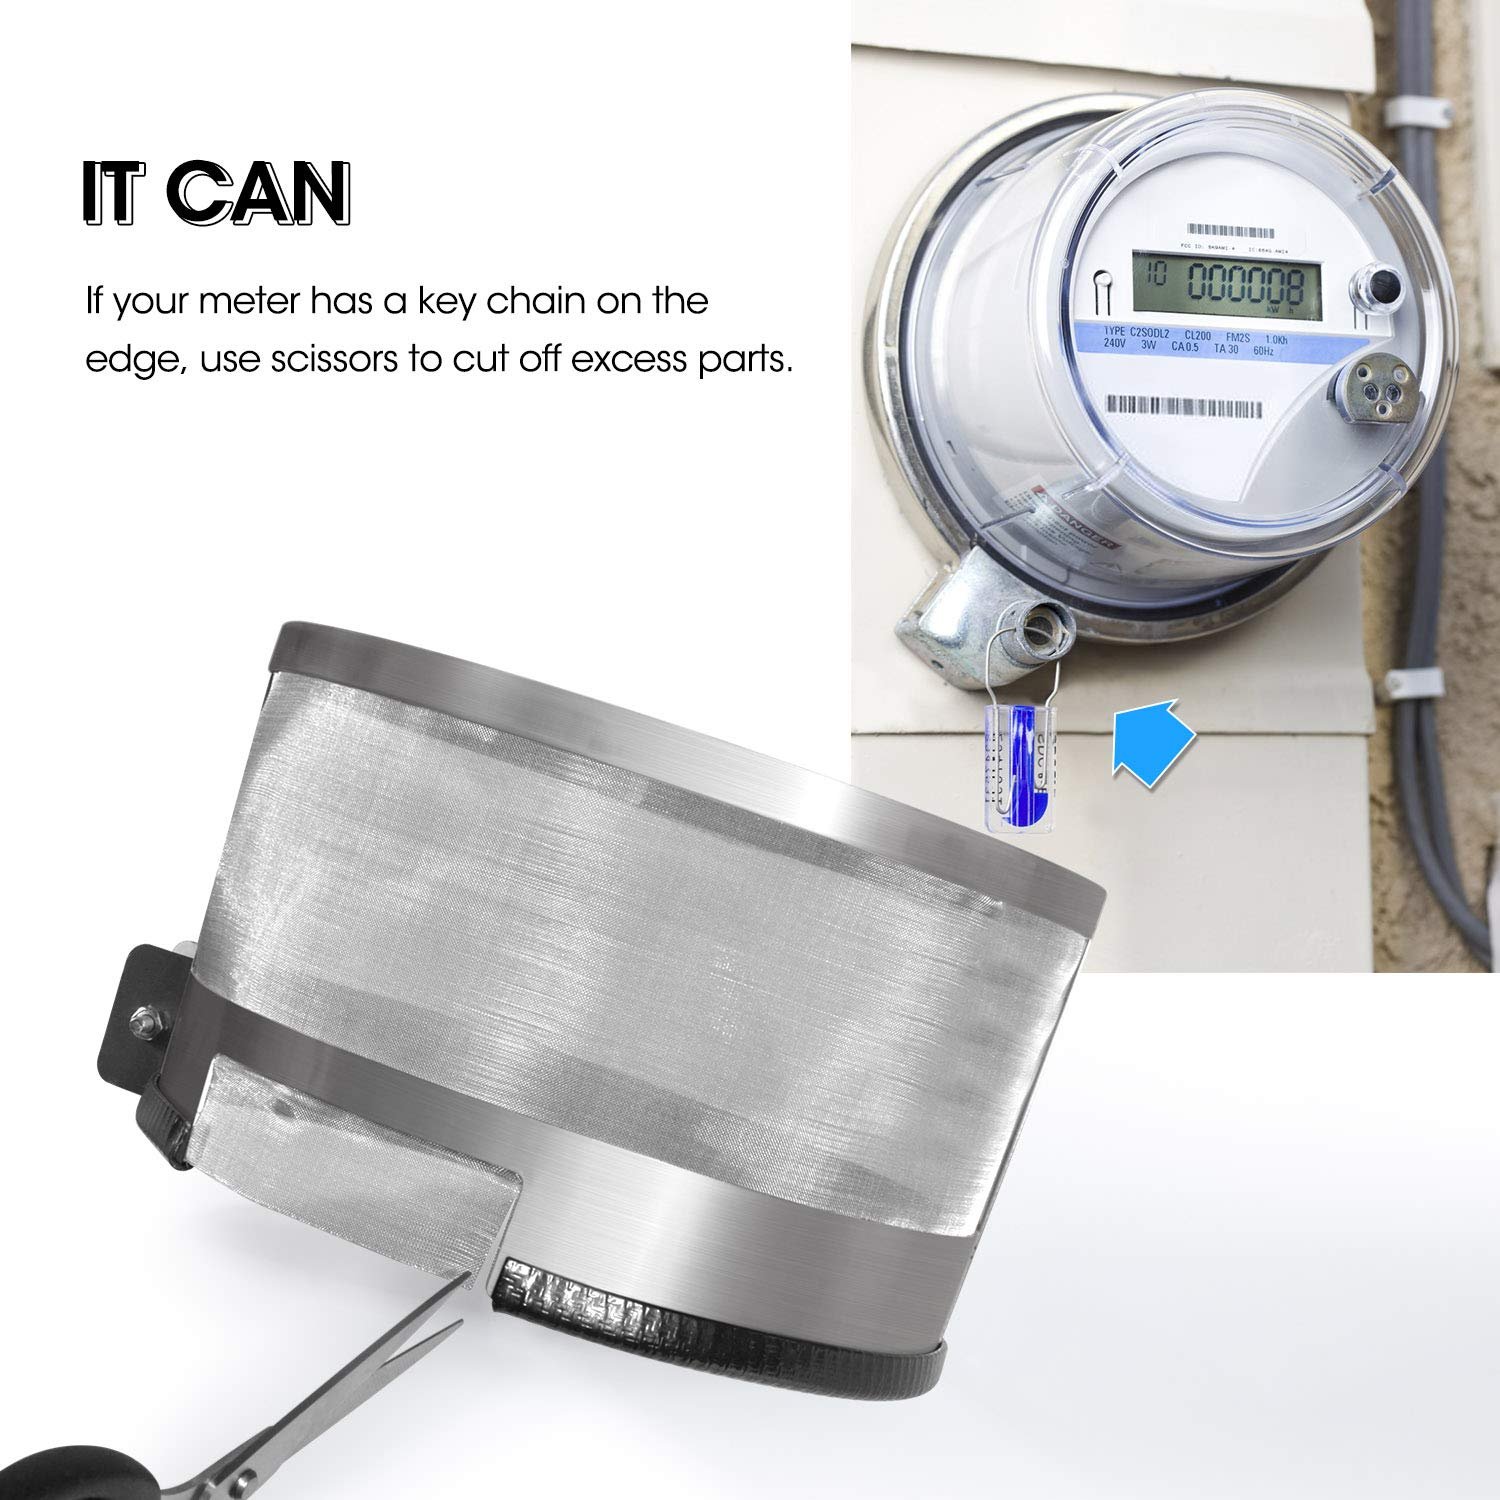 Buzzlett Smart Meter Cover – Stainless Steel Radiation Shield for EMF Protection